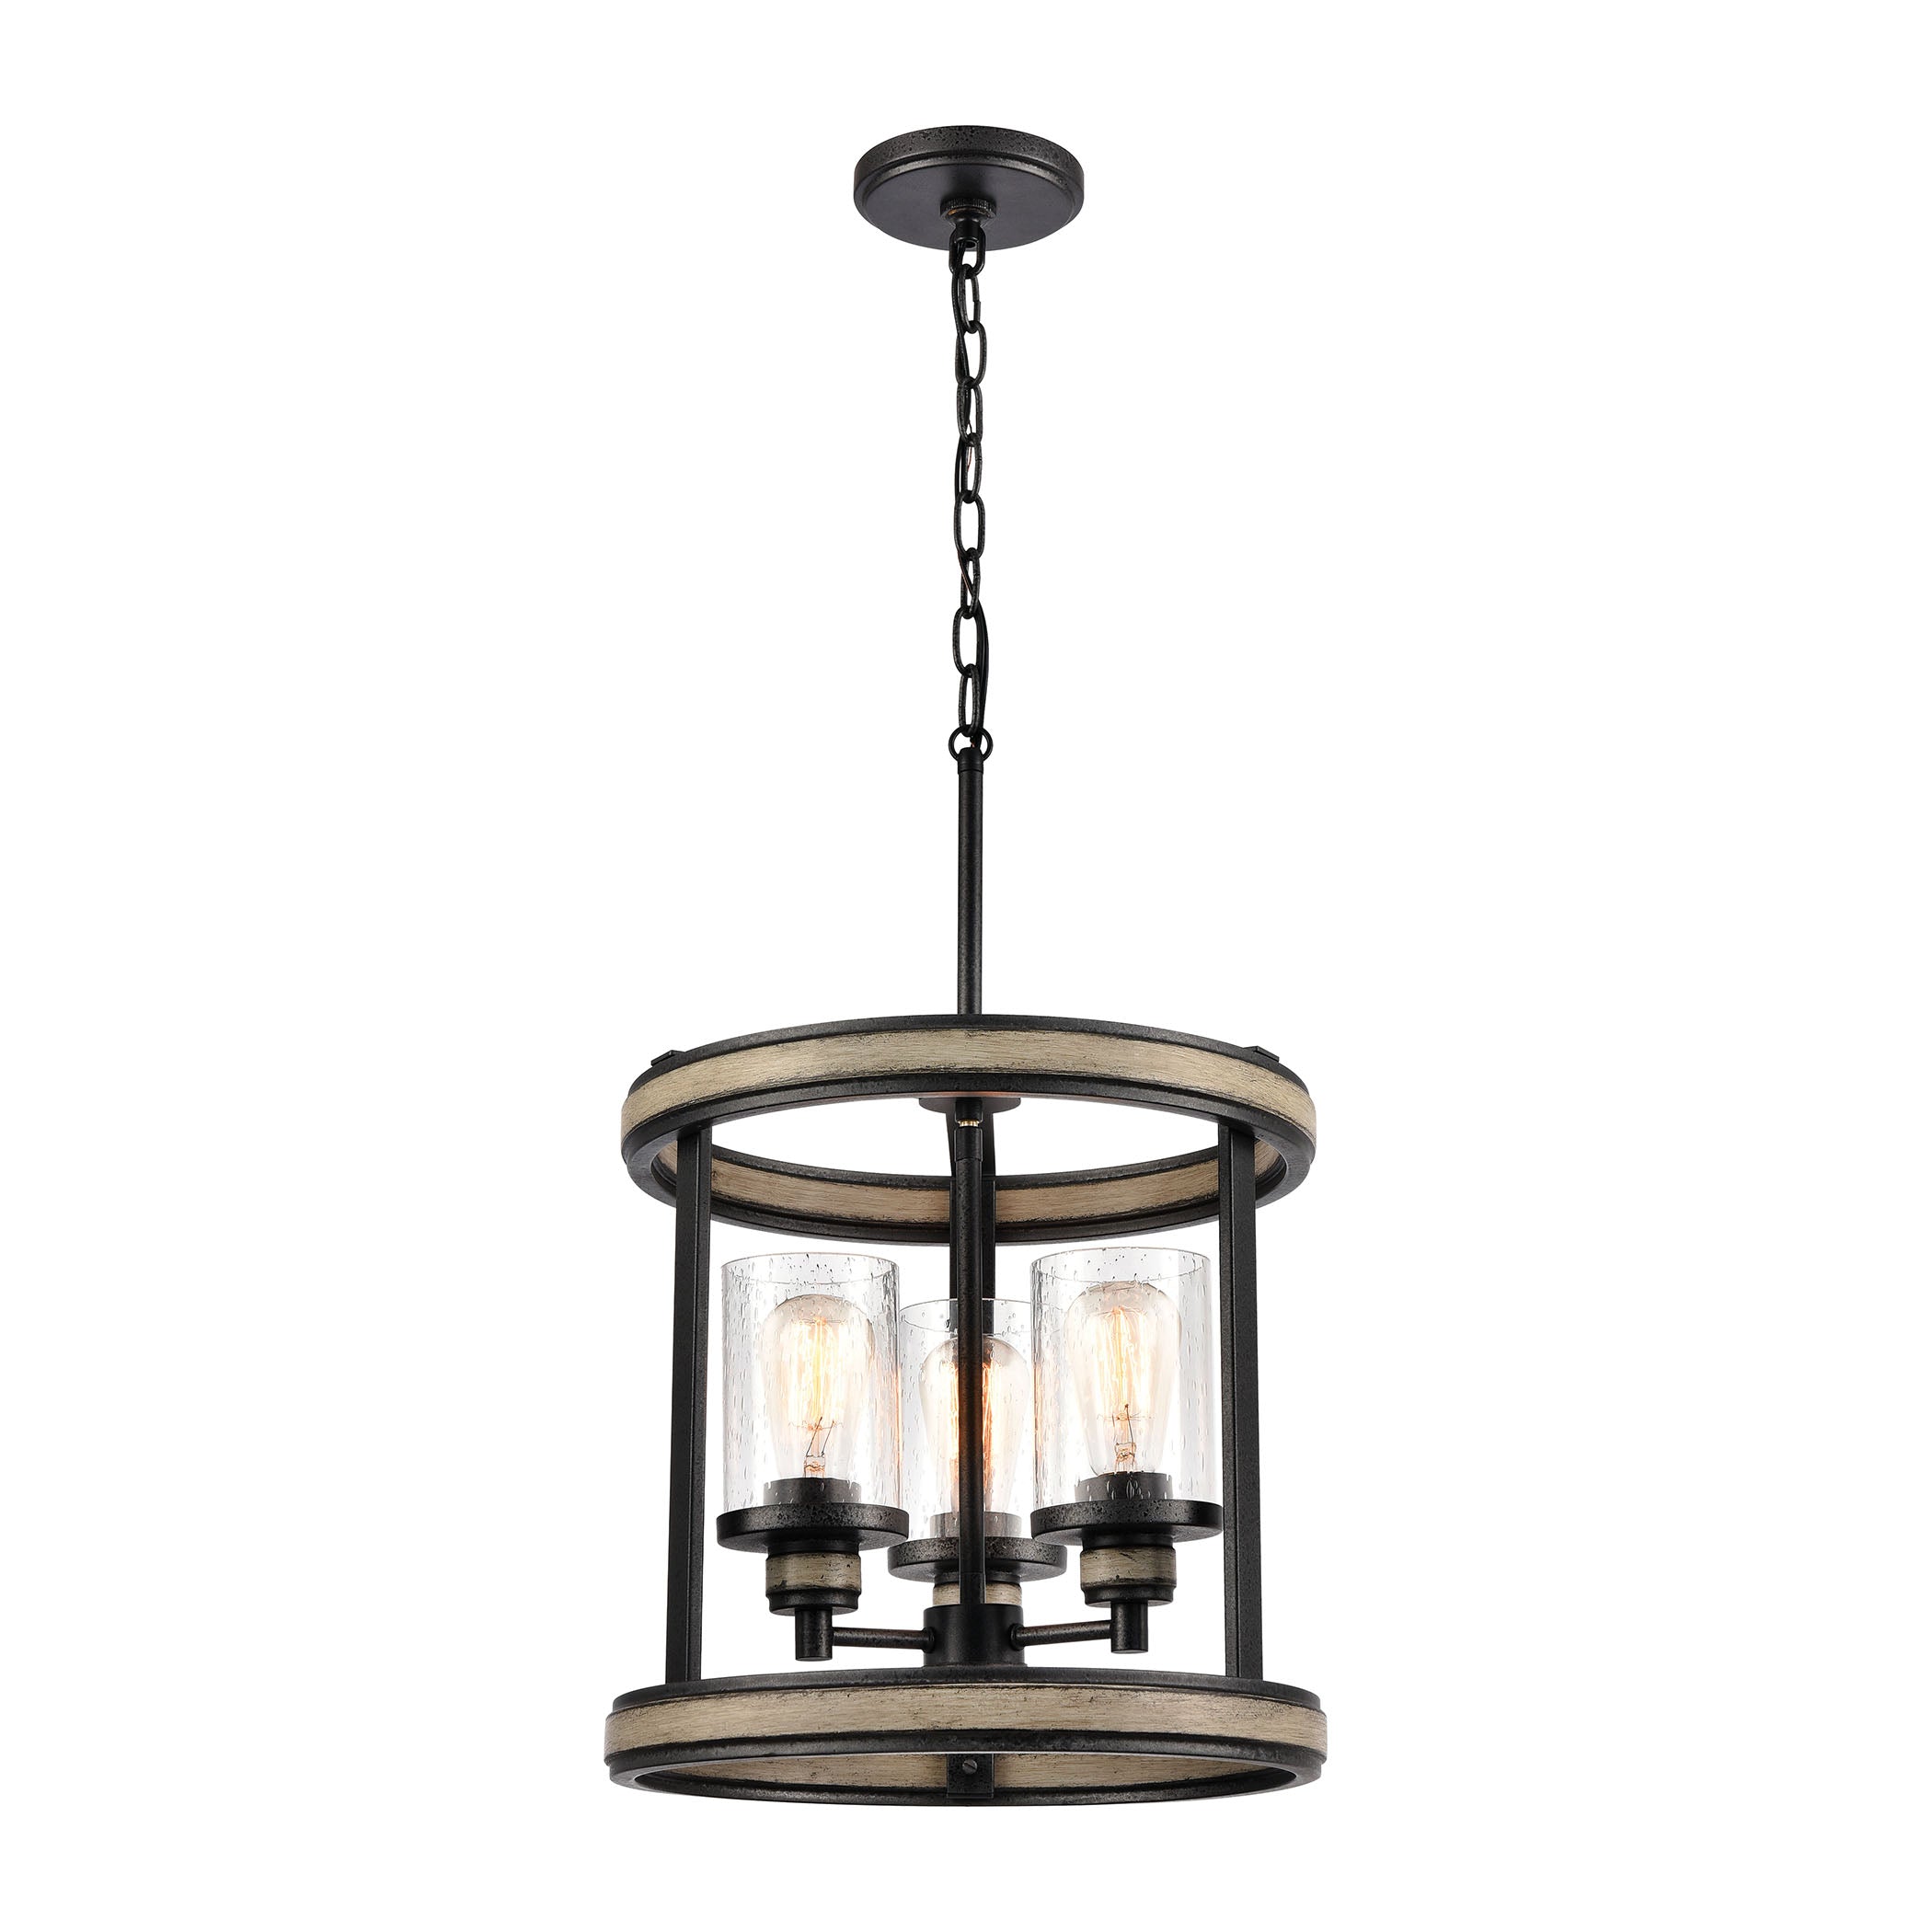 ELK Lighting 89156/3 Beaufort 3-Light Pendant in Anvil Iron and Distressed Antique Graywood with Seedy Glass